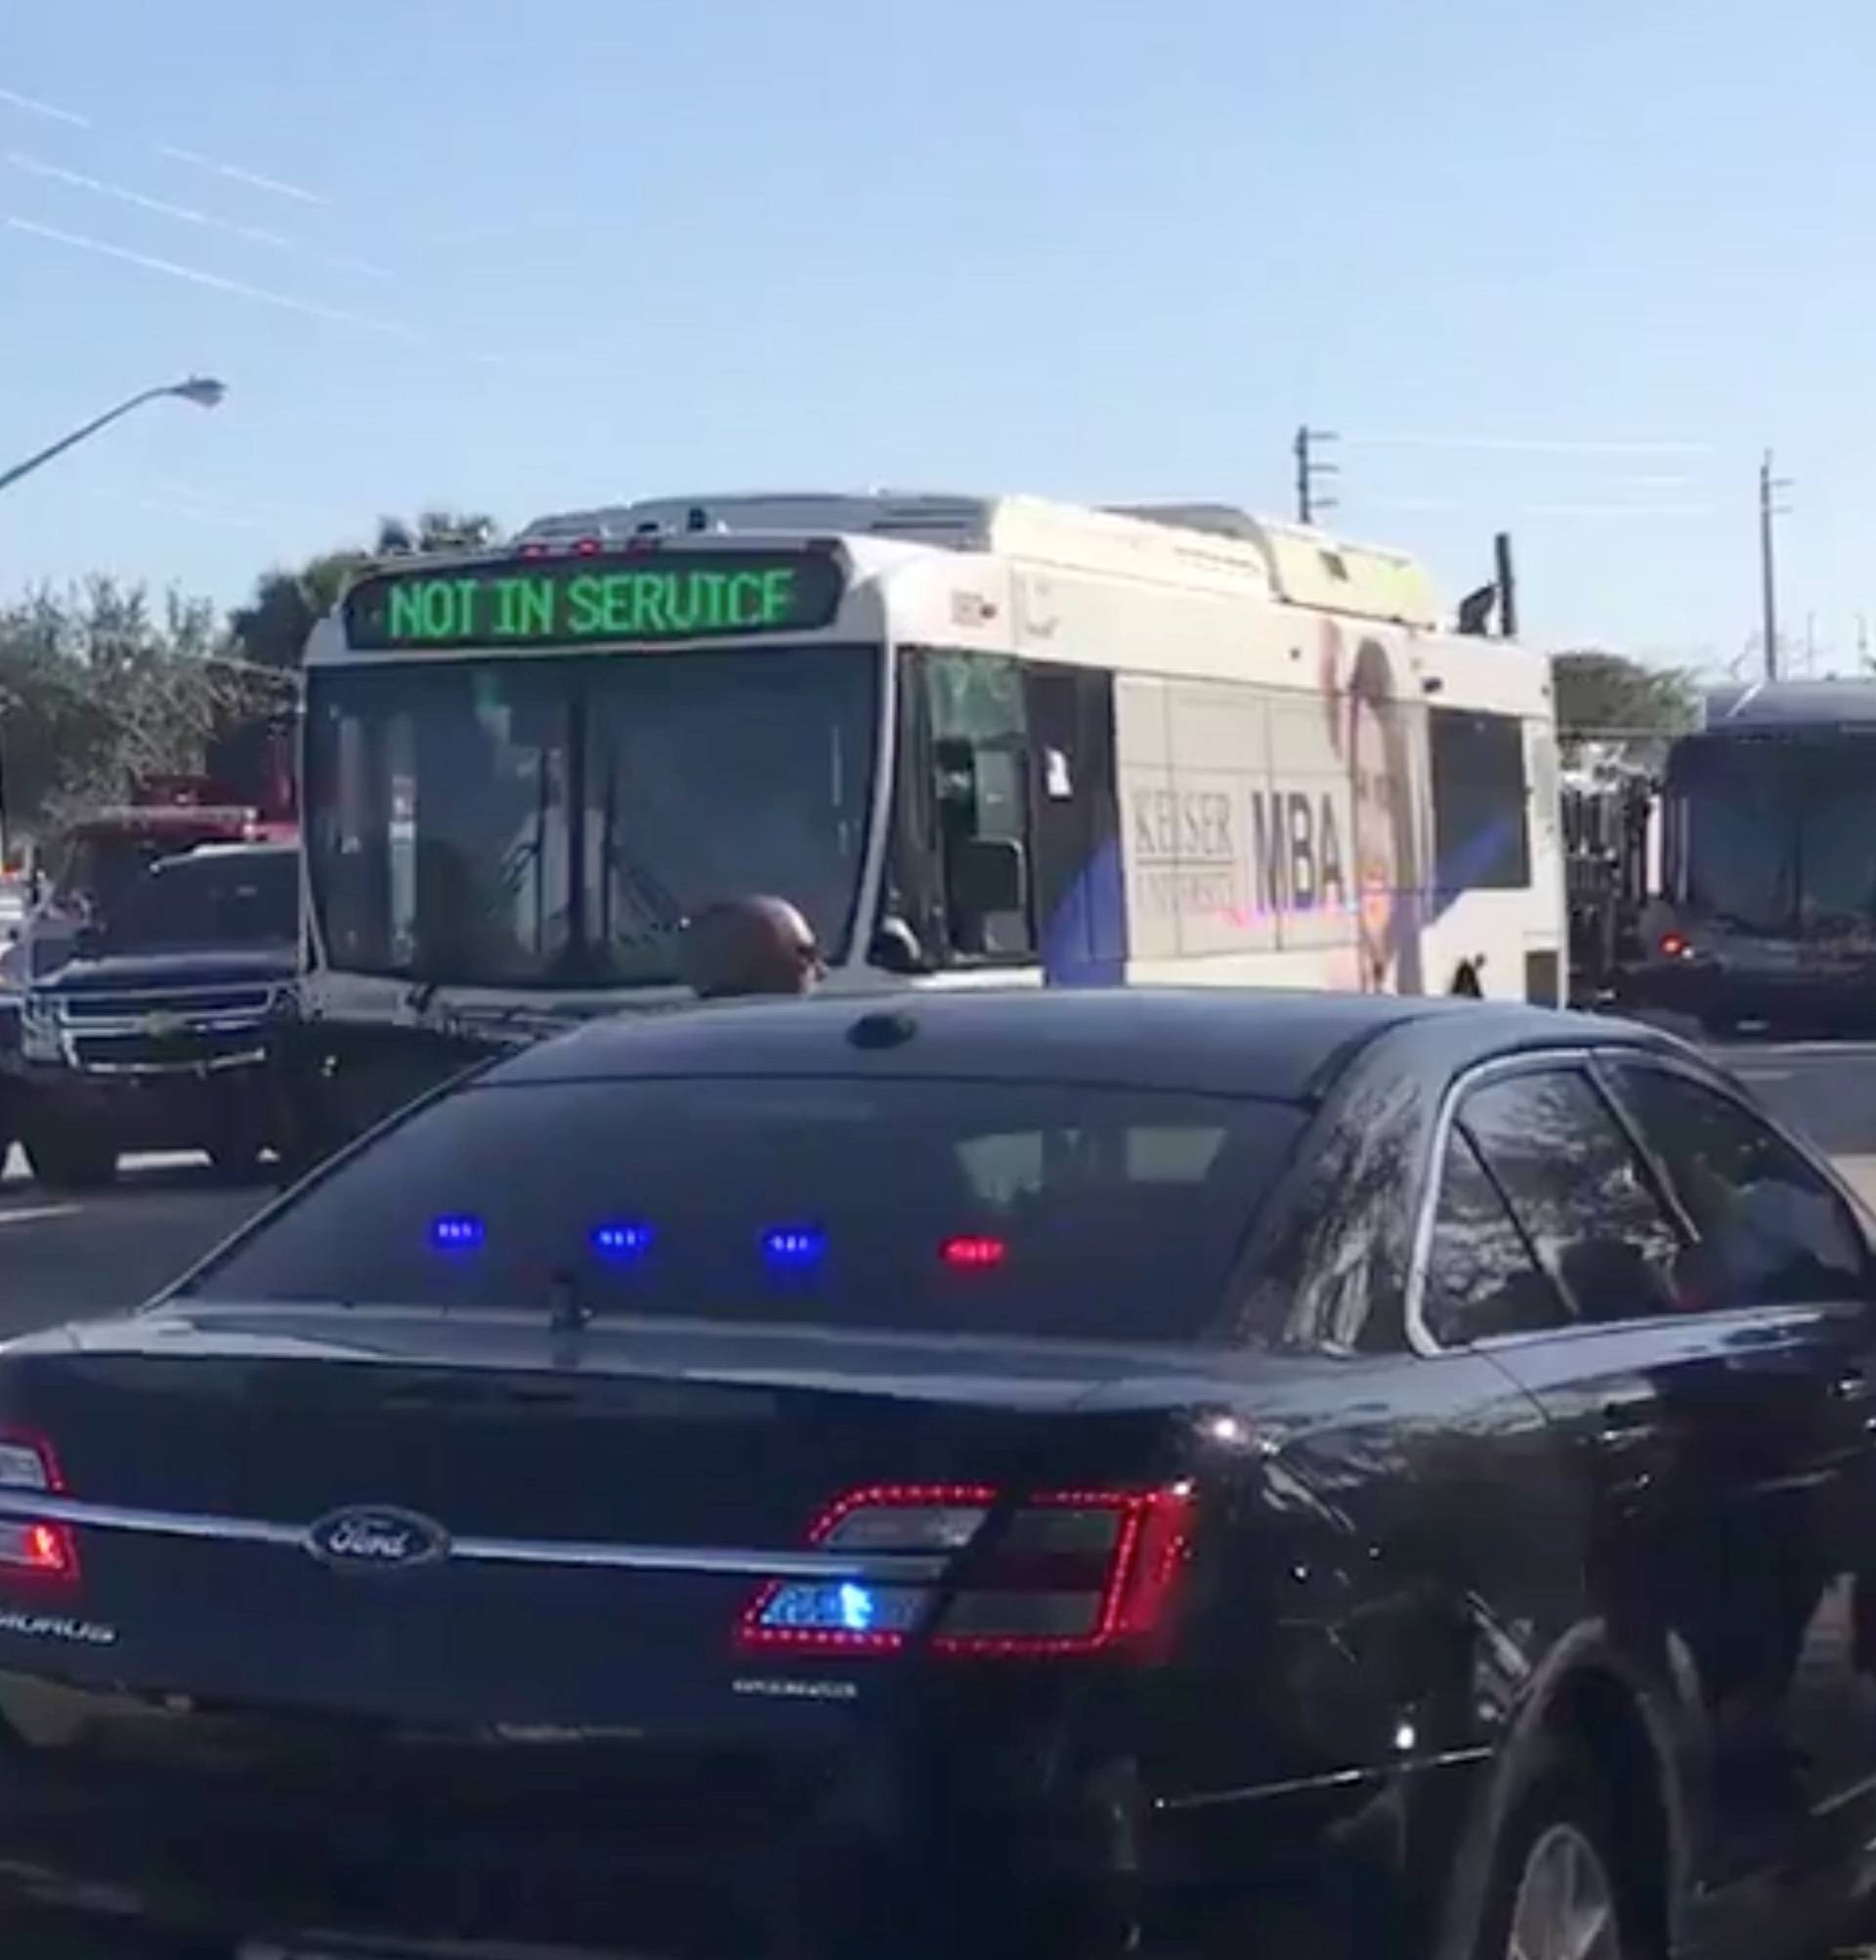 Buses show up to pick students from the Marjory Stoneman Douglas High School in Parkland where a shooting took place, in Coral Springs